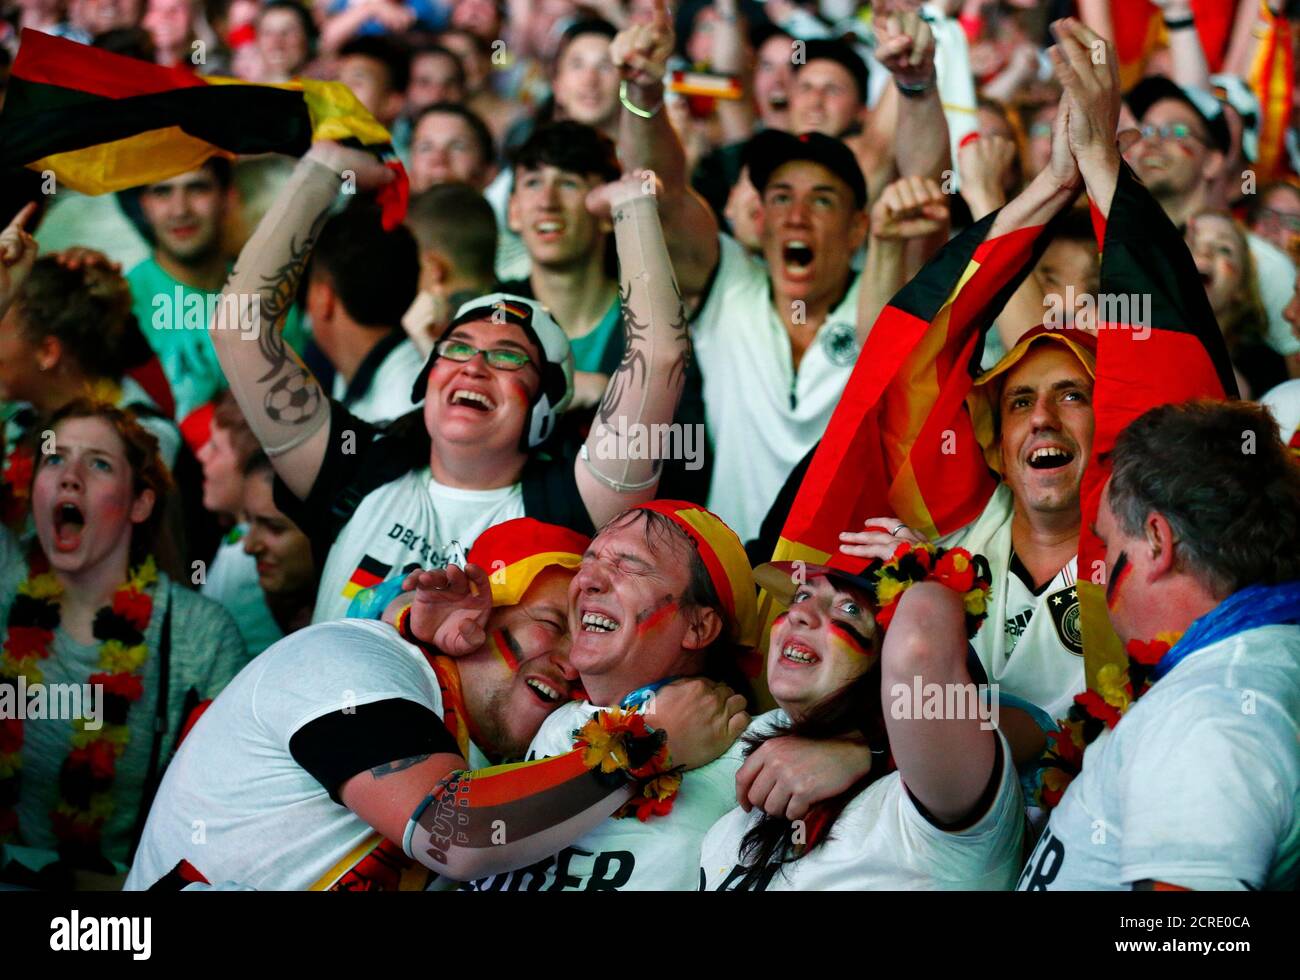 People celebrate after Germany scored against Brazil during their 2014 World Cup semi-finals, at the Fanmeile public viewing arena in Berlin July 8, 2014.  REUTERS/Thomas Peter (GERMANY - Tags: SPORT SOCCER WORLD CUP) Stock Photo